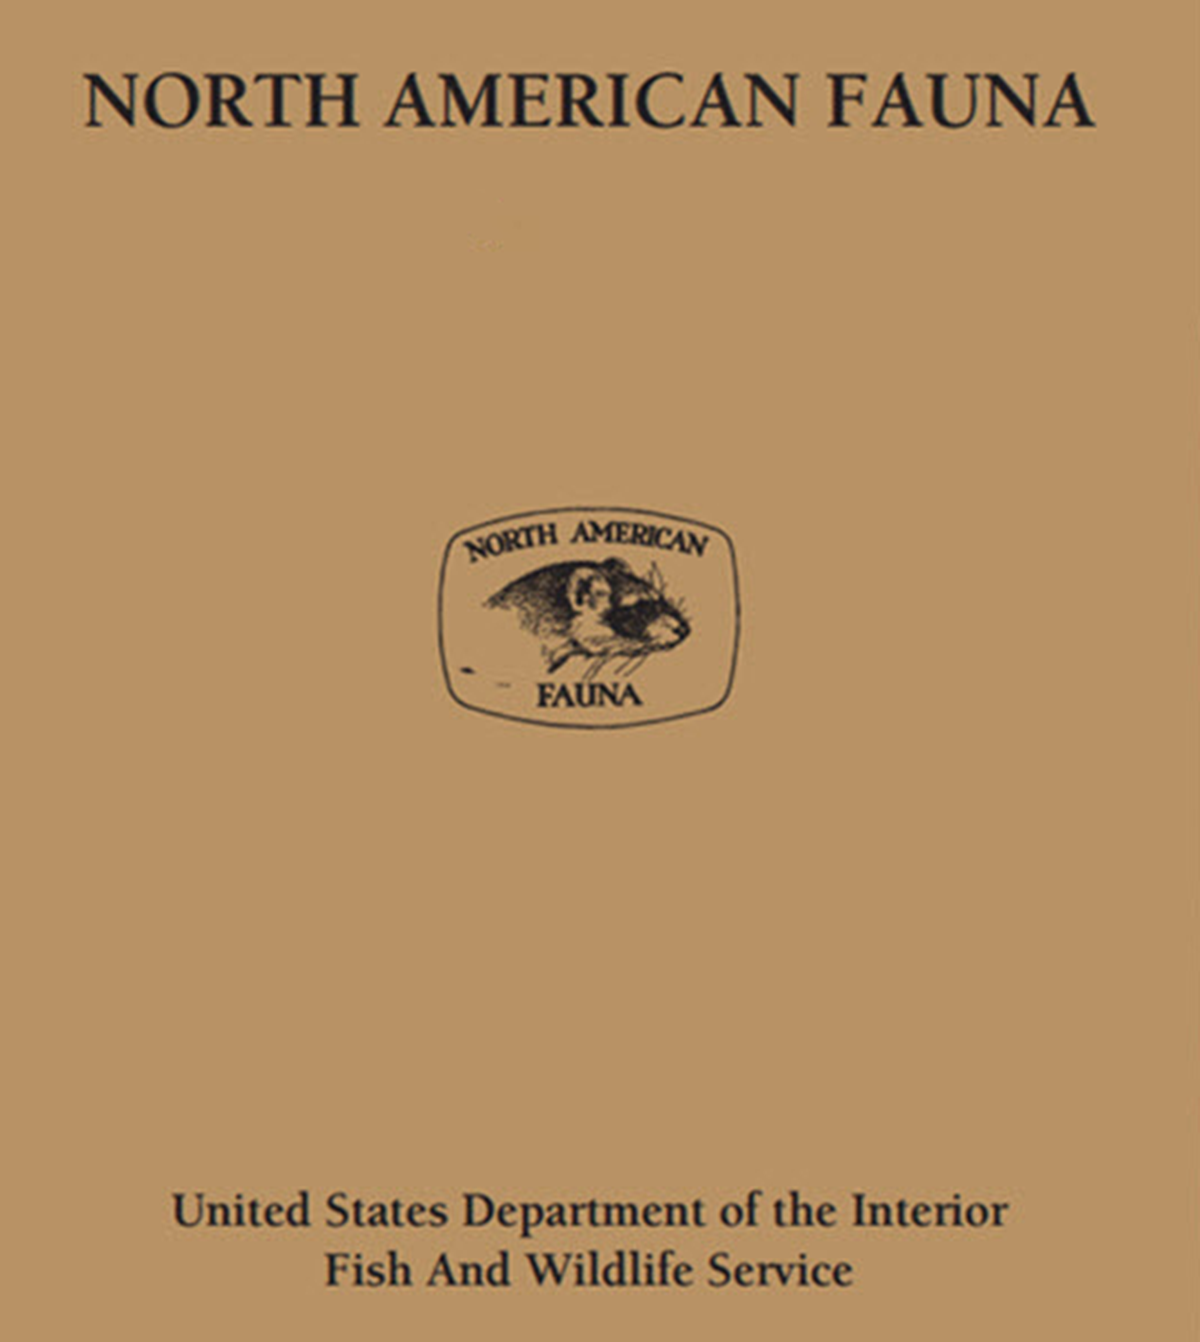 tan cover for North American Fauna showing black and white fauna